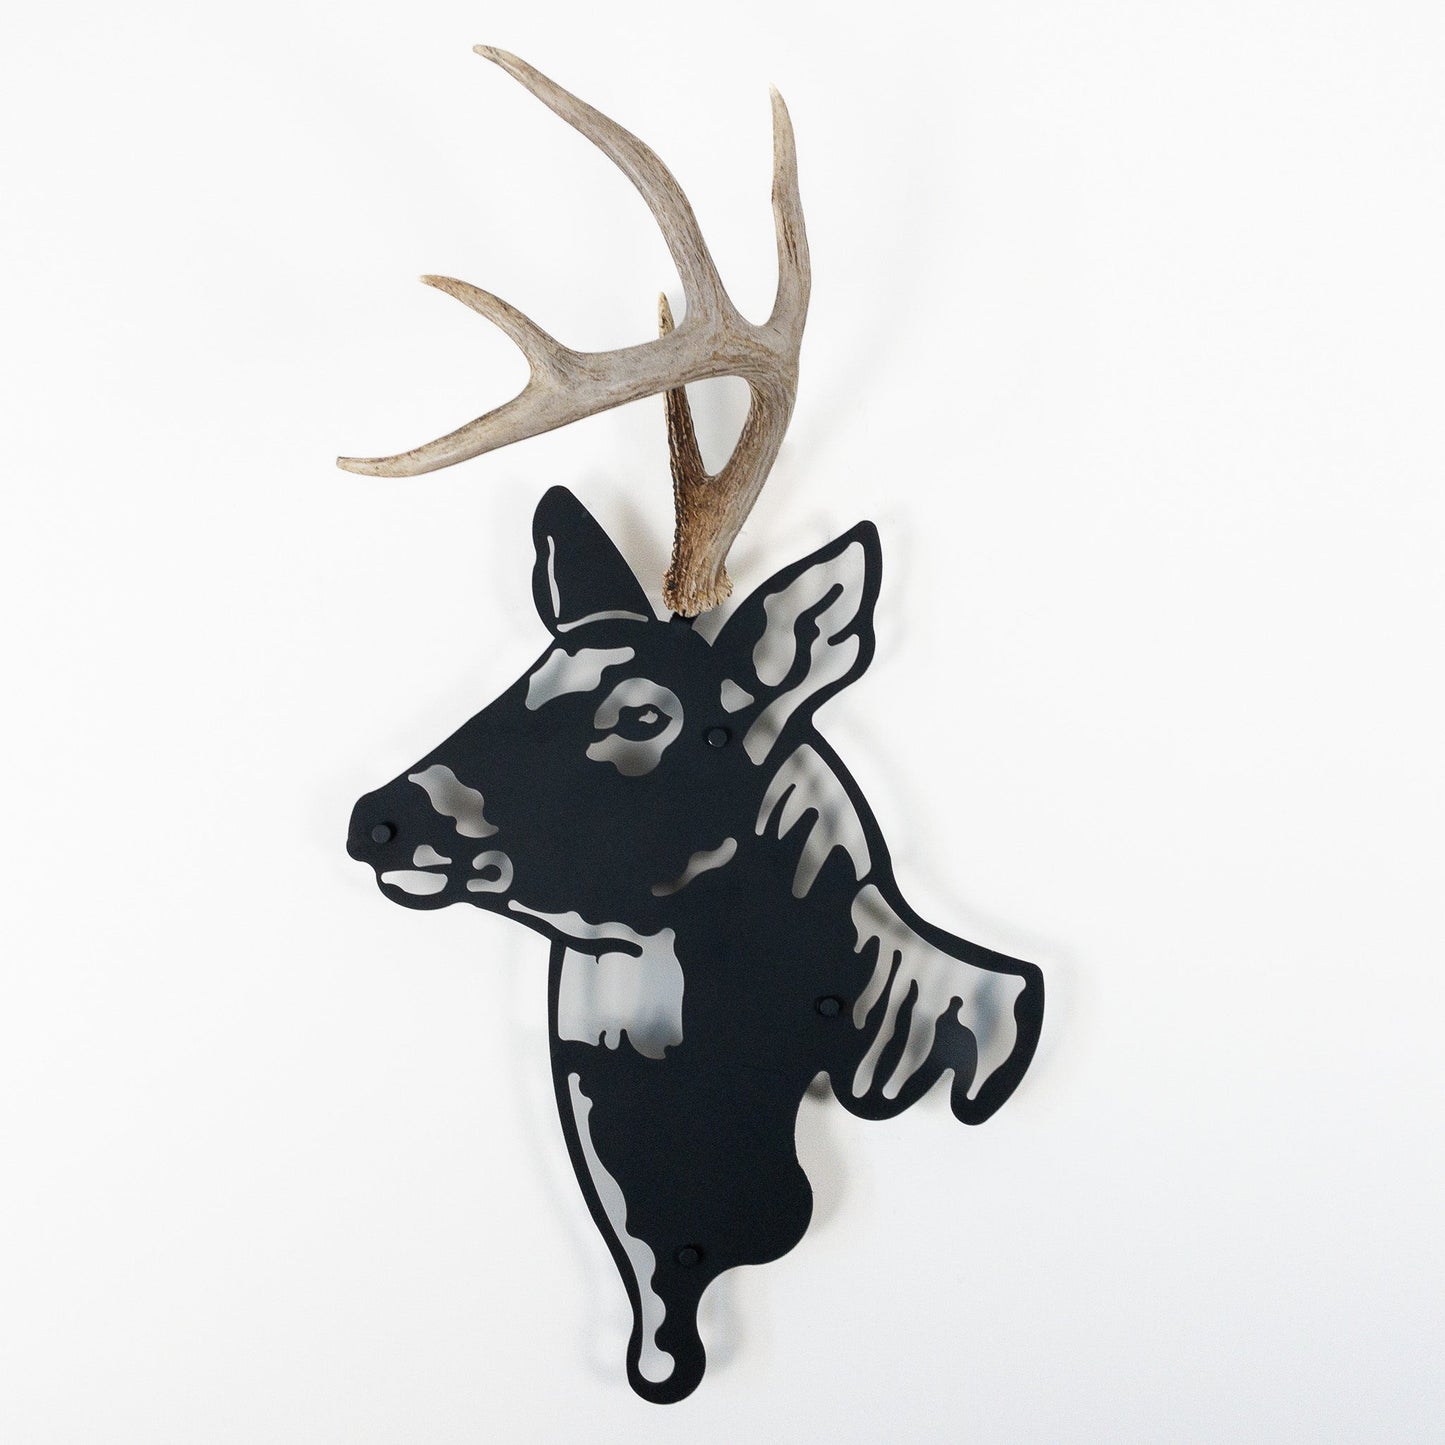 A metal wall decor made from real shed antler   White-Tailed Deer antlers mounted on a metal head